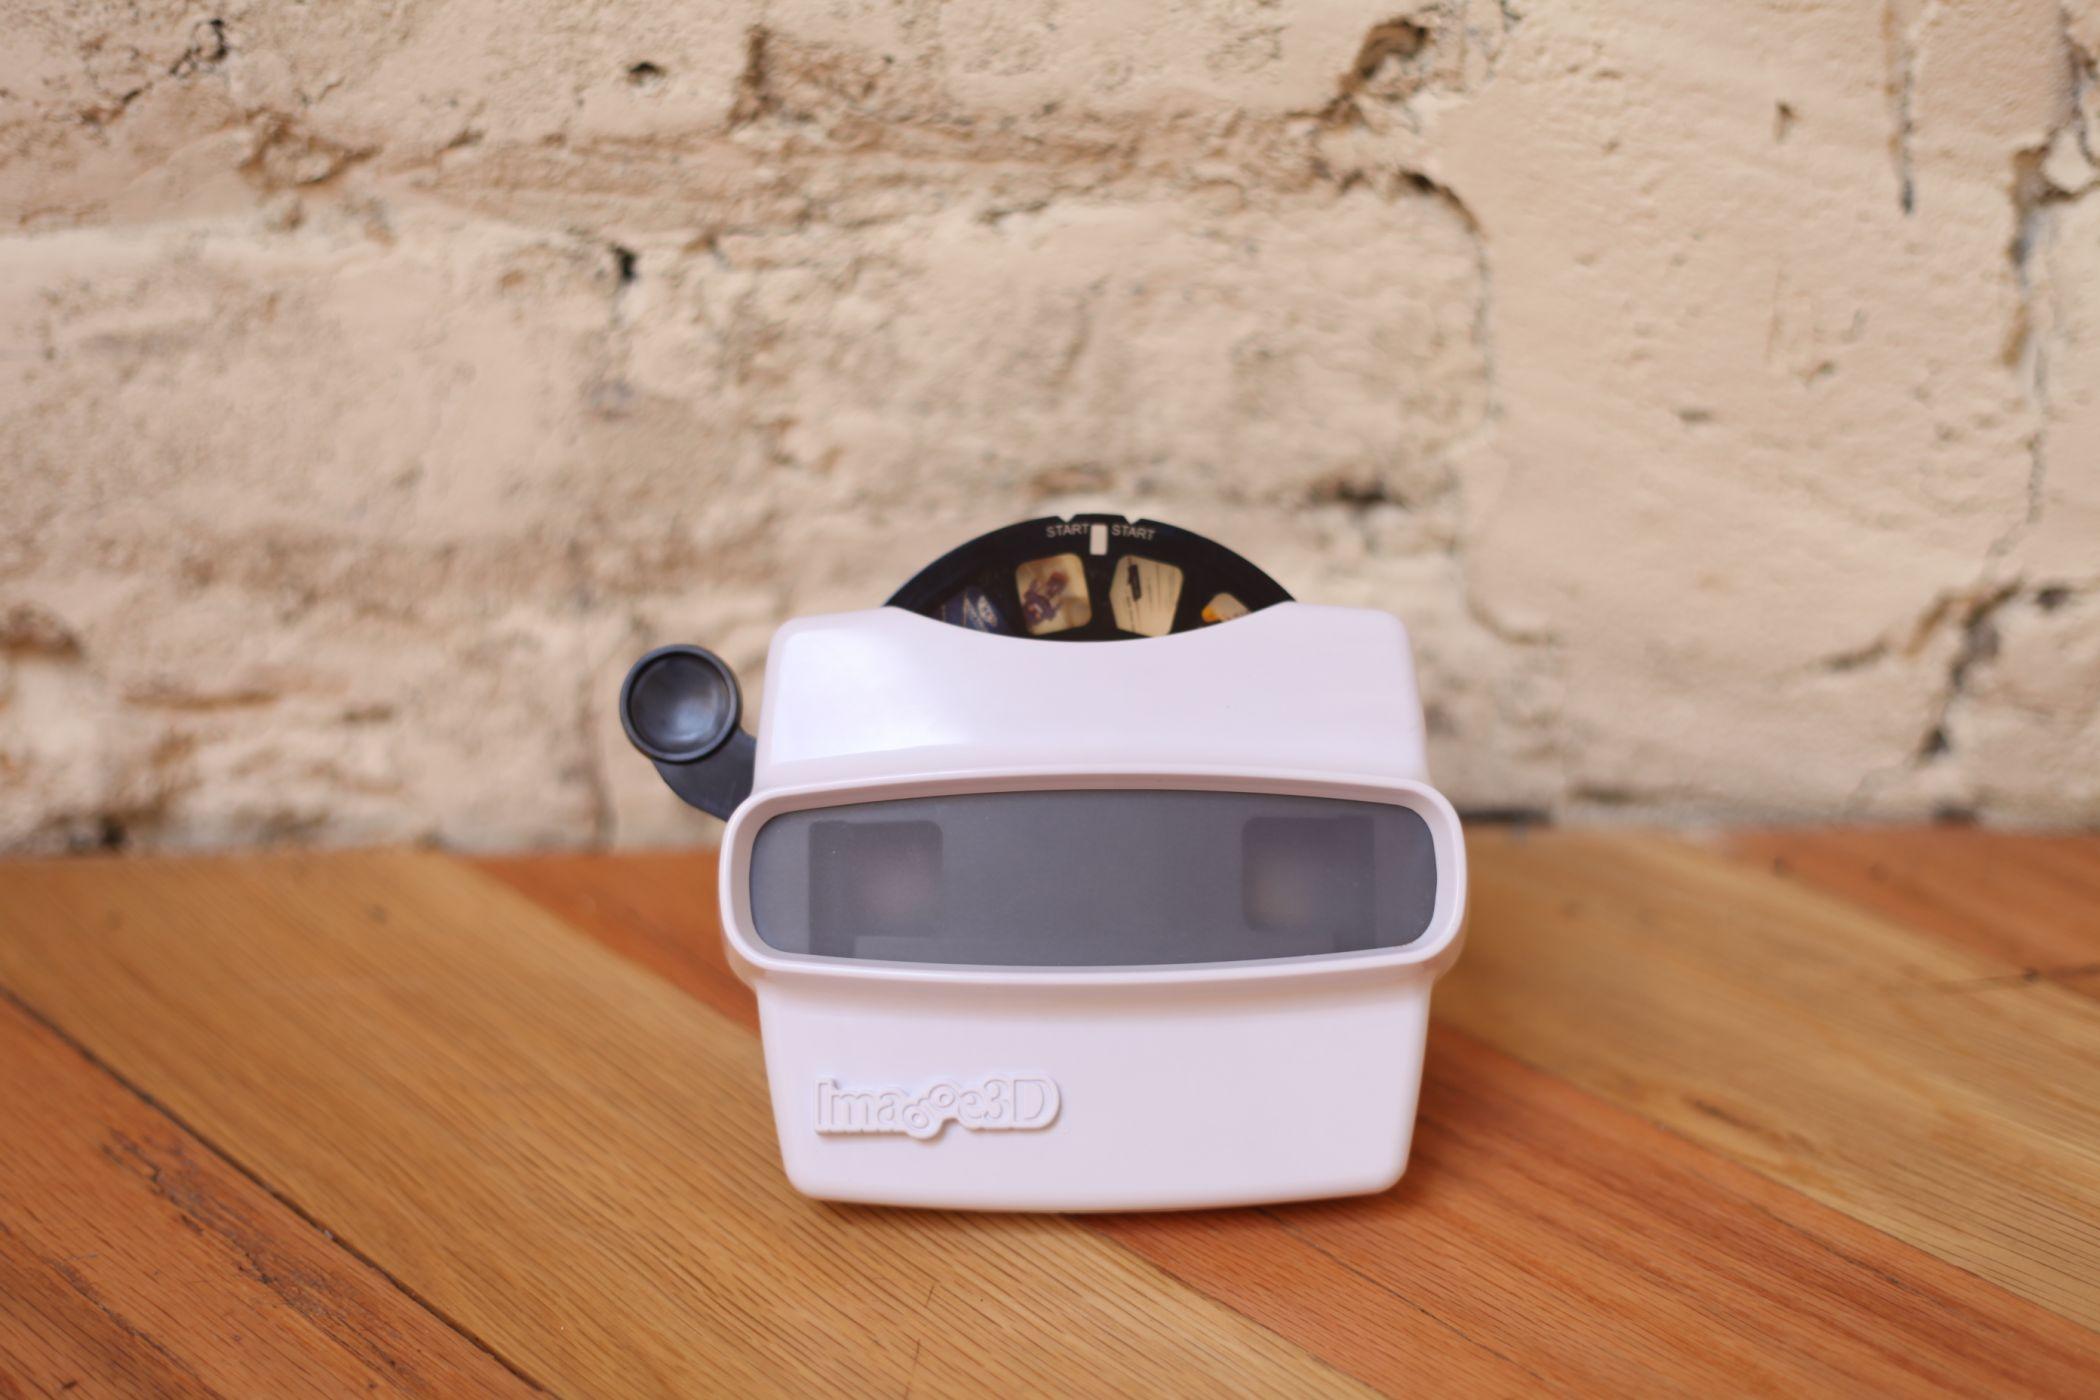 Image3D lets you create your own View-Master-esque photo reels